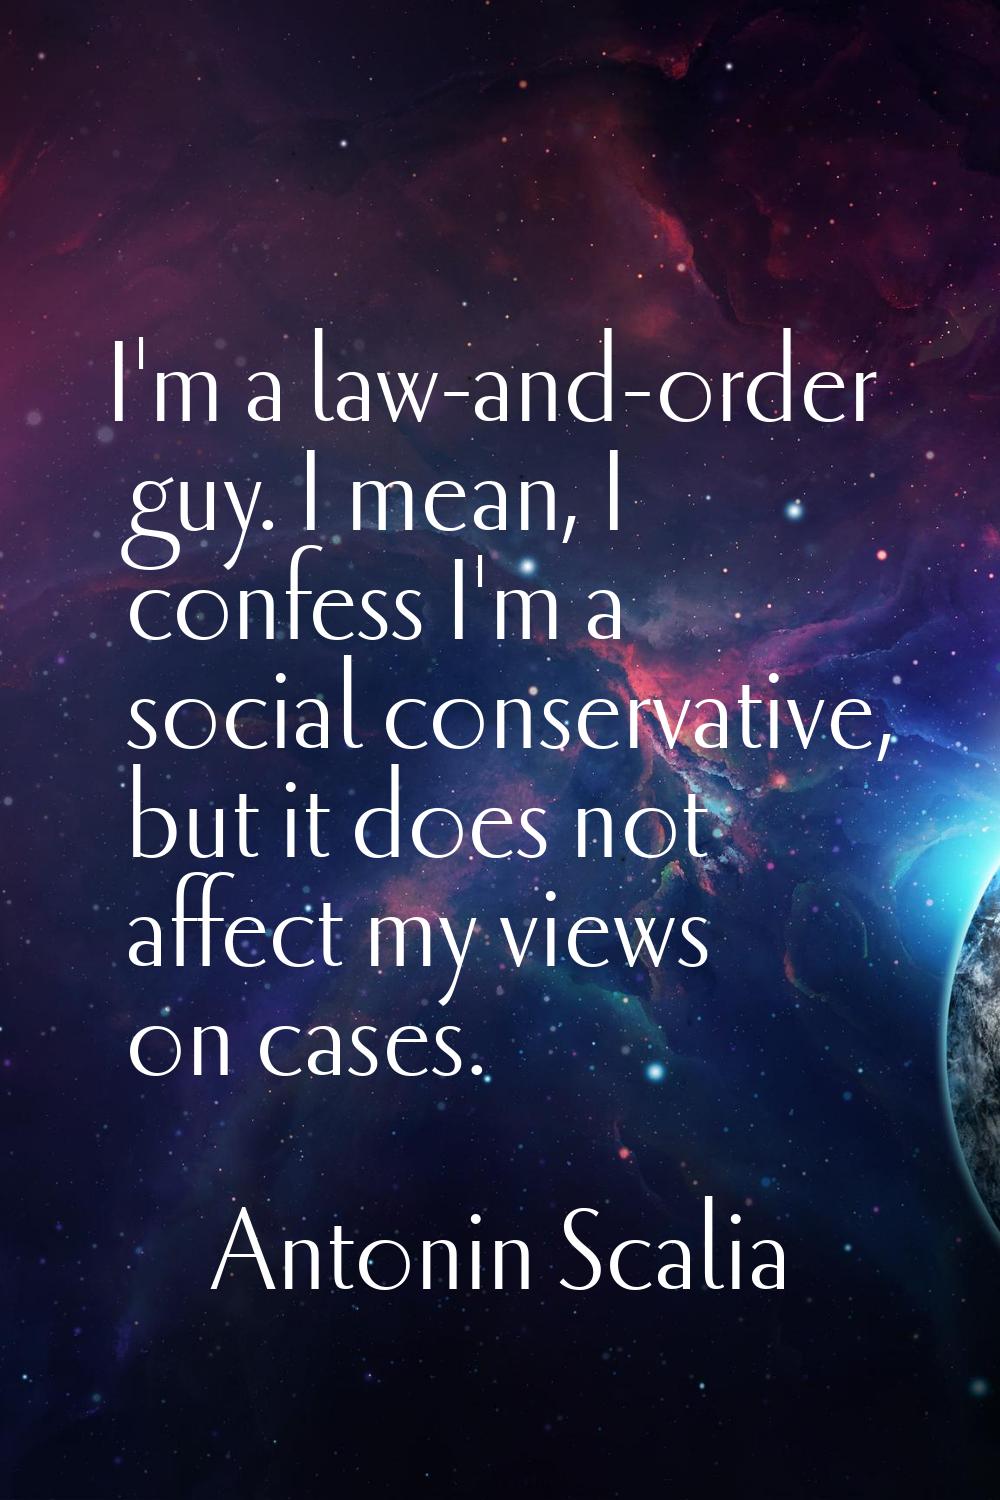 I'm a law-and-order guy. I mean, I confess I'm a social conservative, but it does not affect my vie